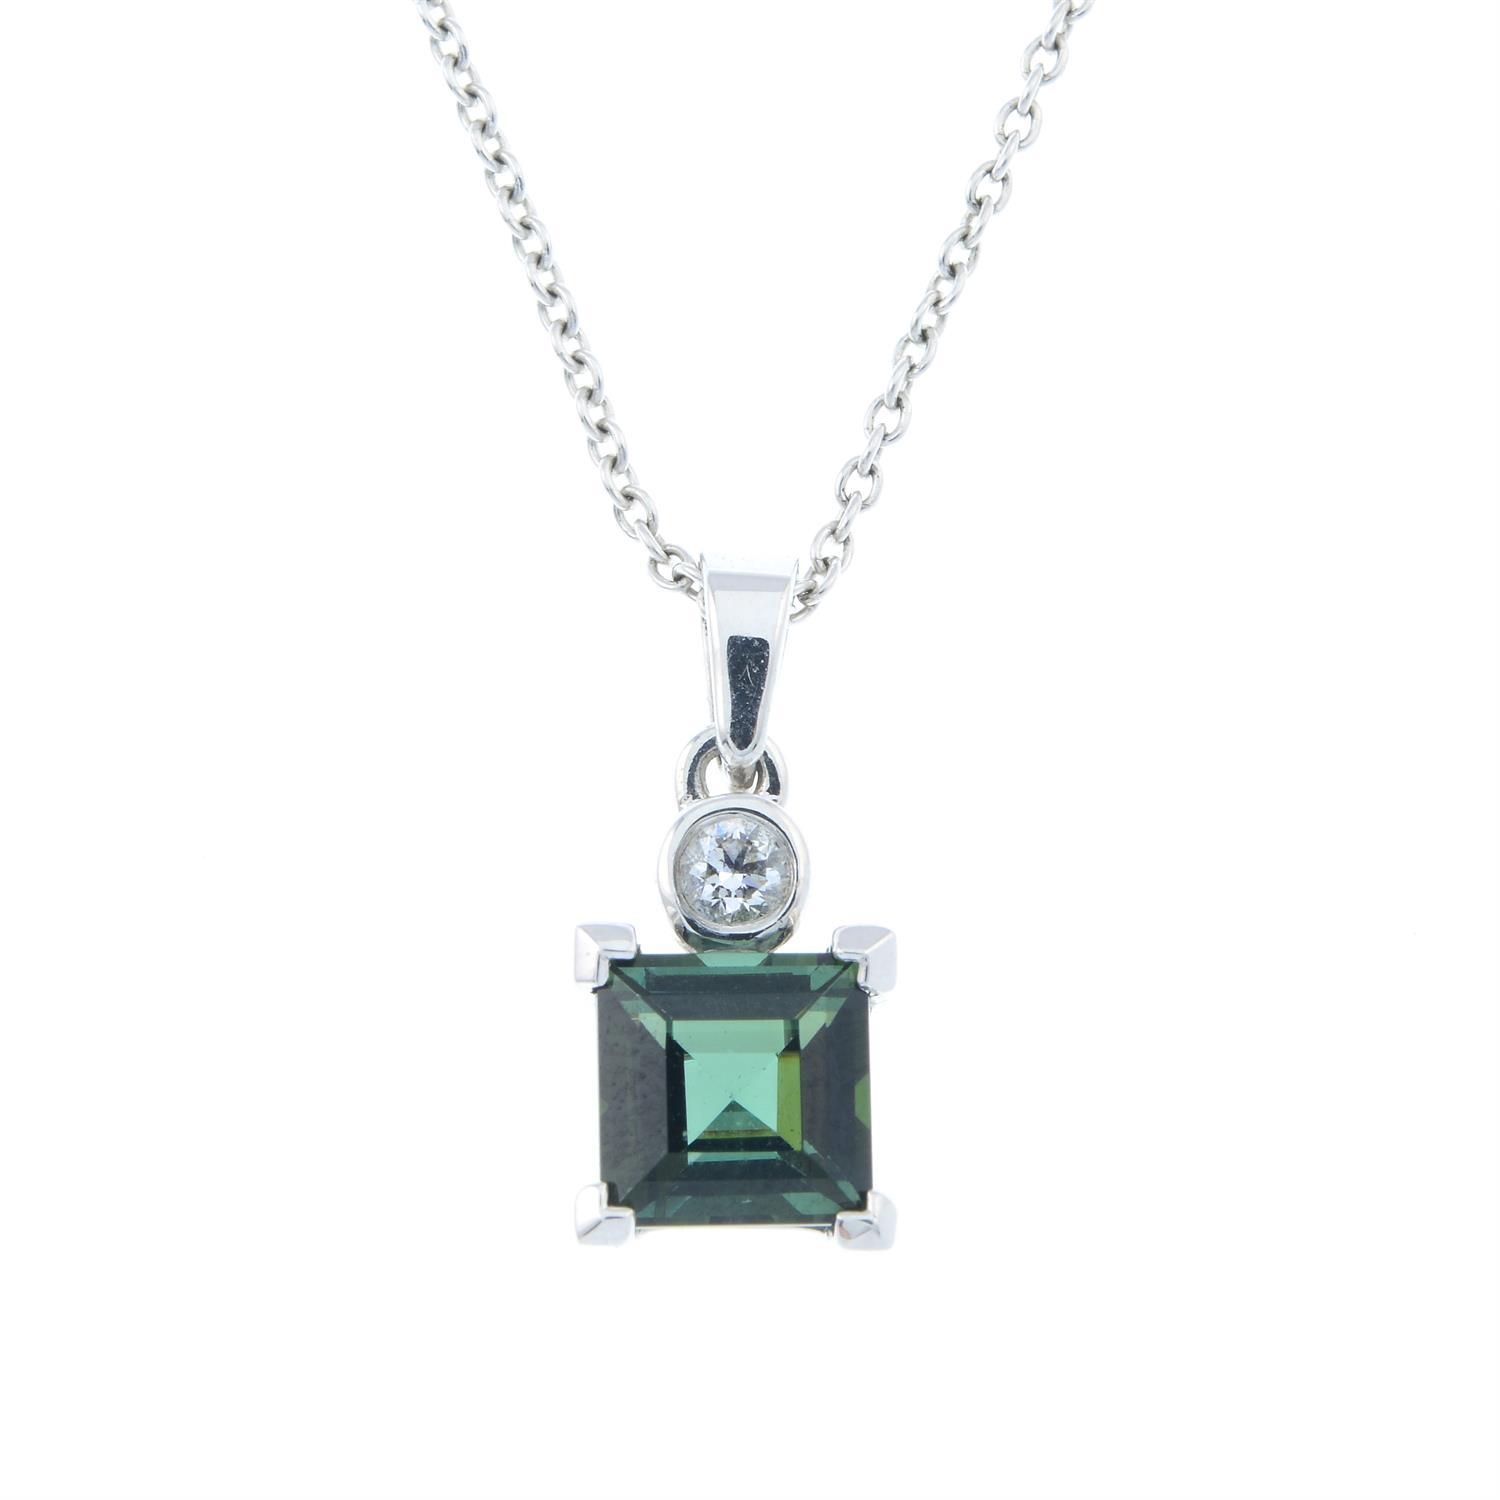 18ct gold green tourmaline and diamond pendant with chain - Image 2 of 3